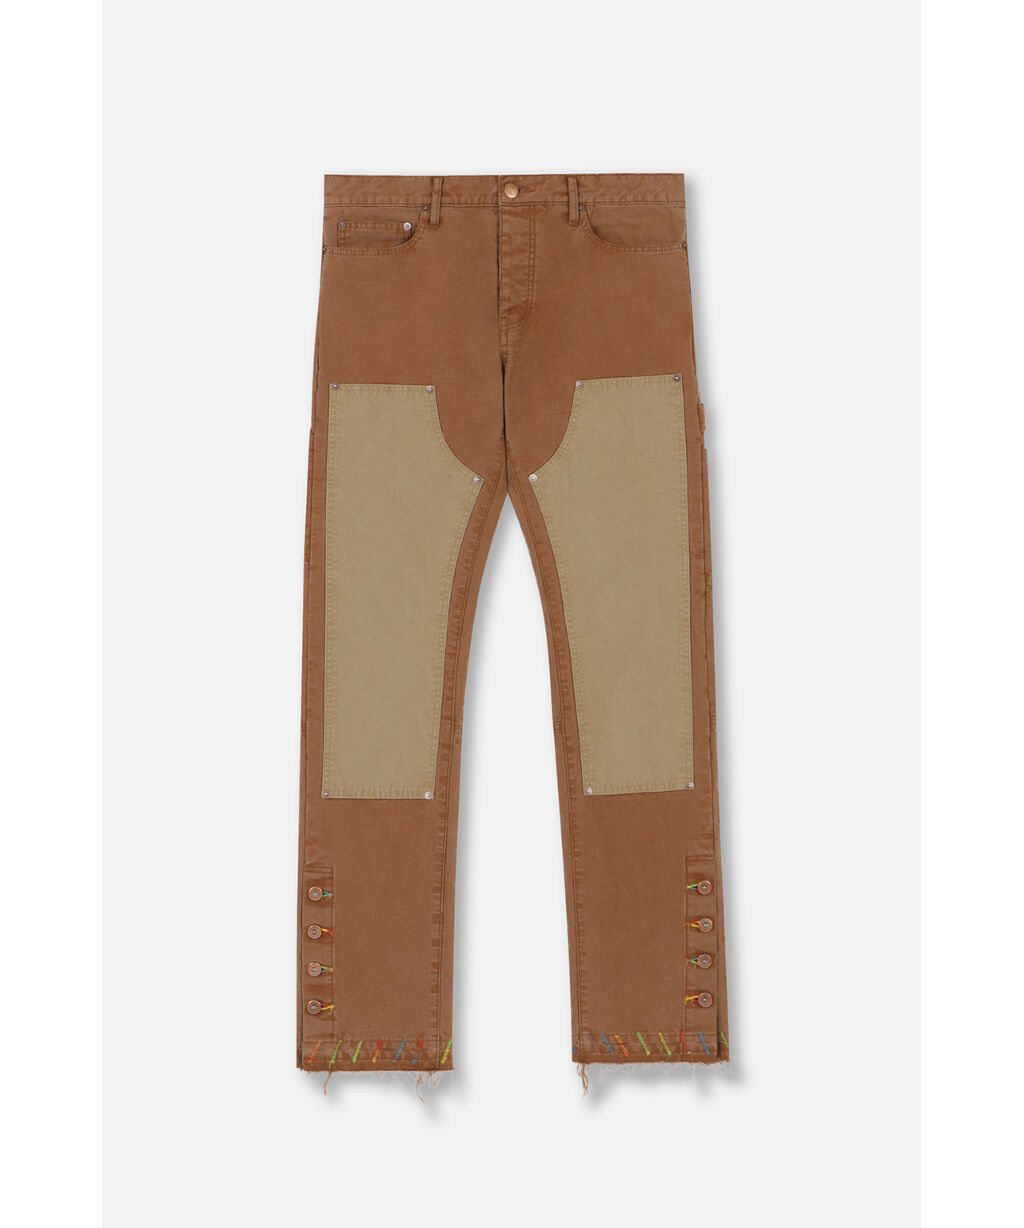 mlvinceメルヴィンス DOUBLE KNEE JEANS 32インチ - デニム/ジーンズ